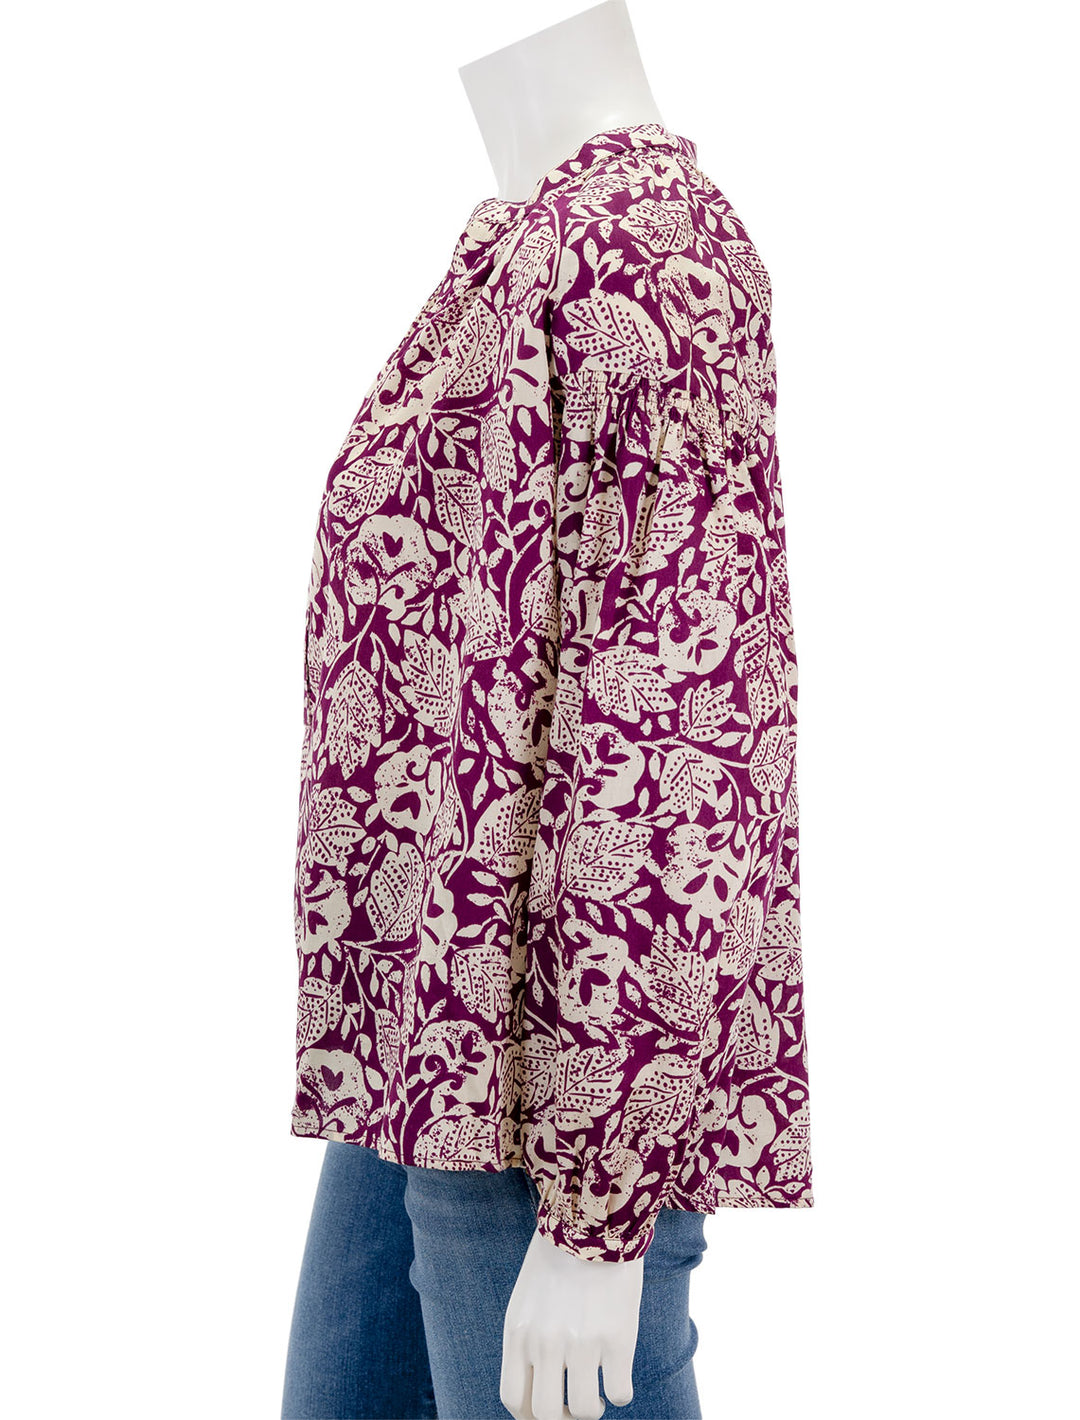 Side view of Vanessa Bruno's nipoa top in plum floral.